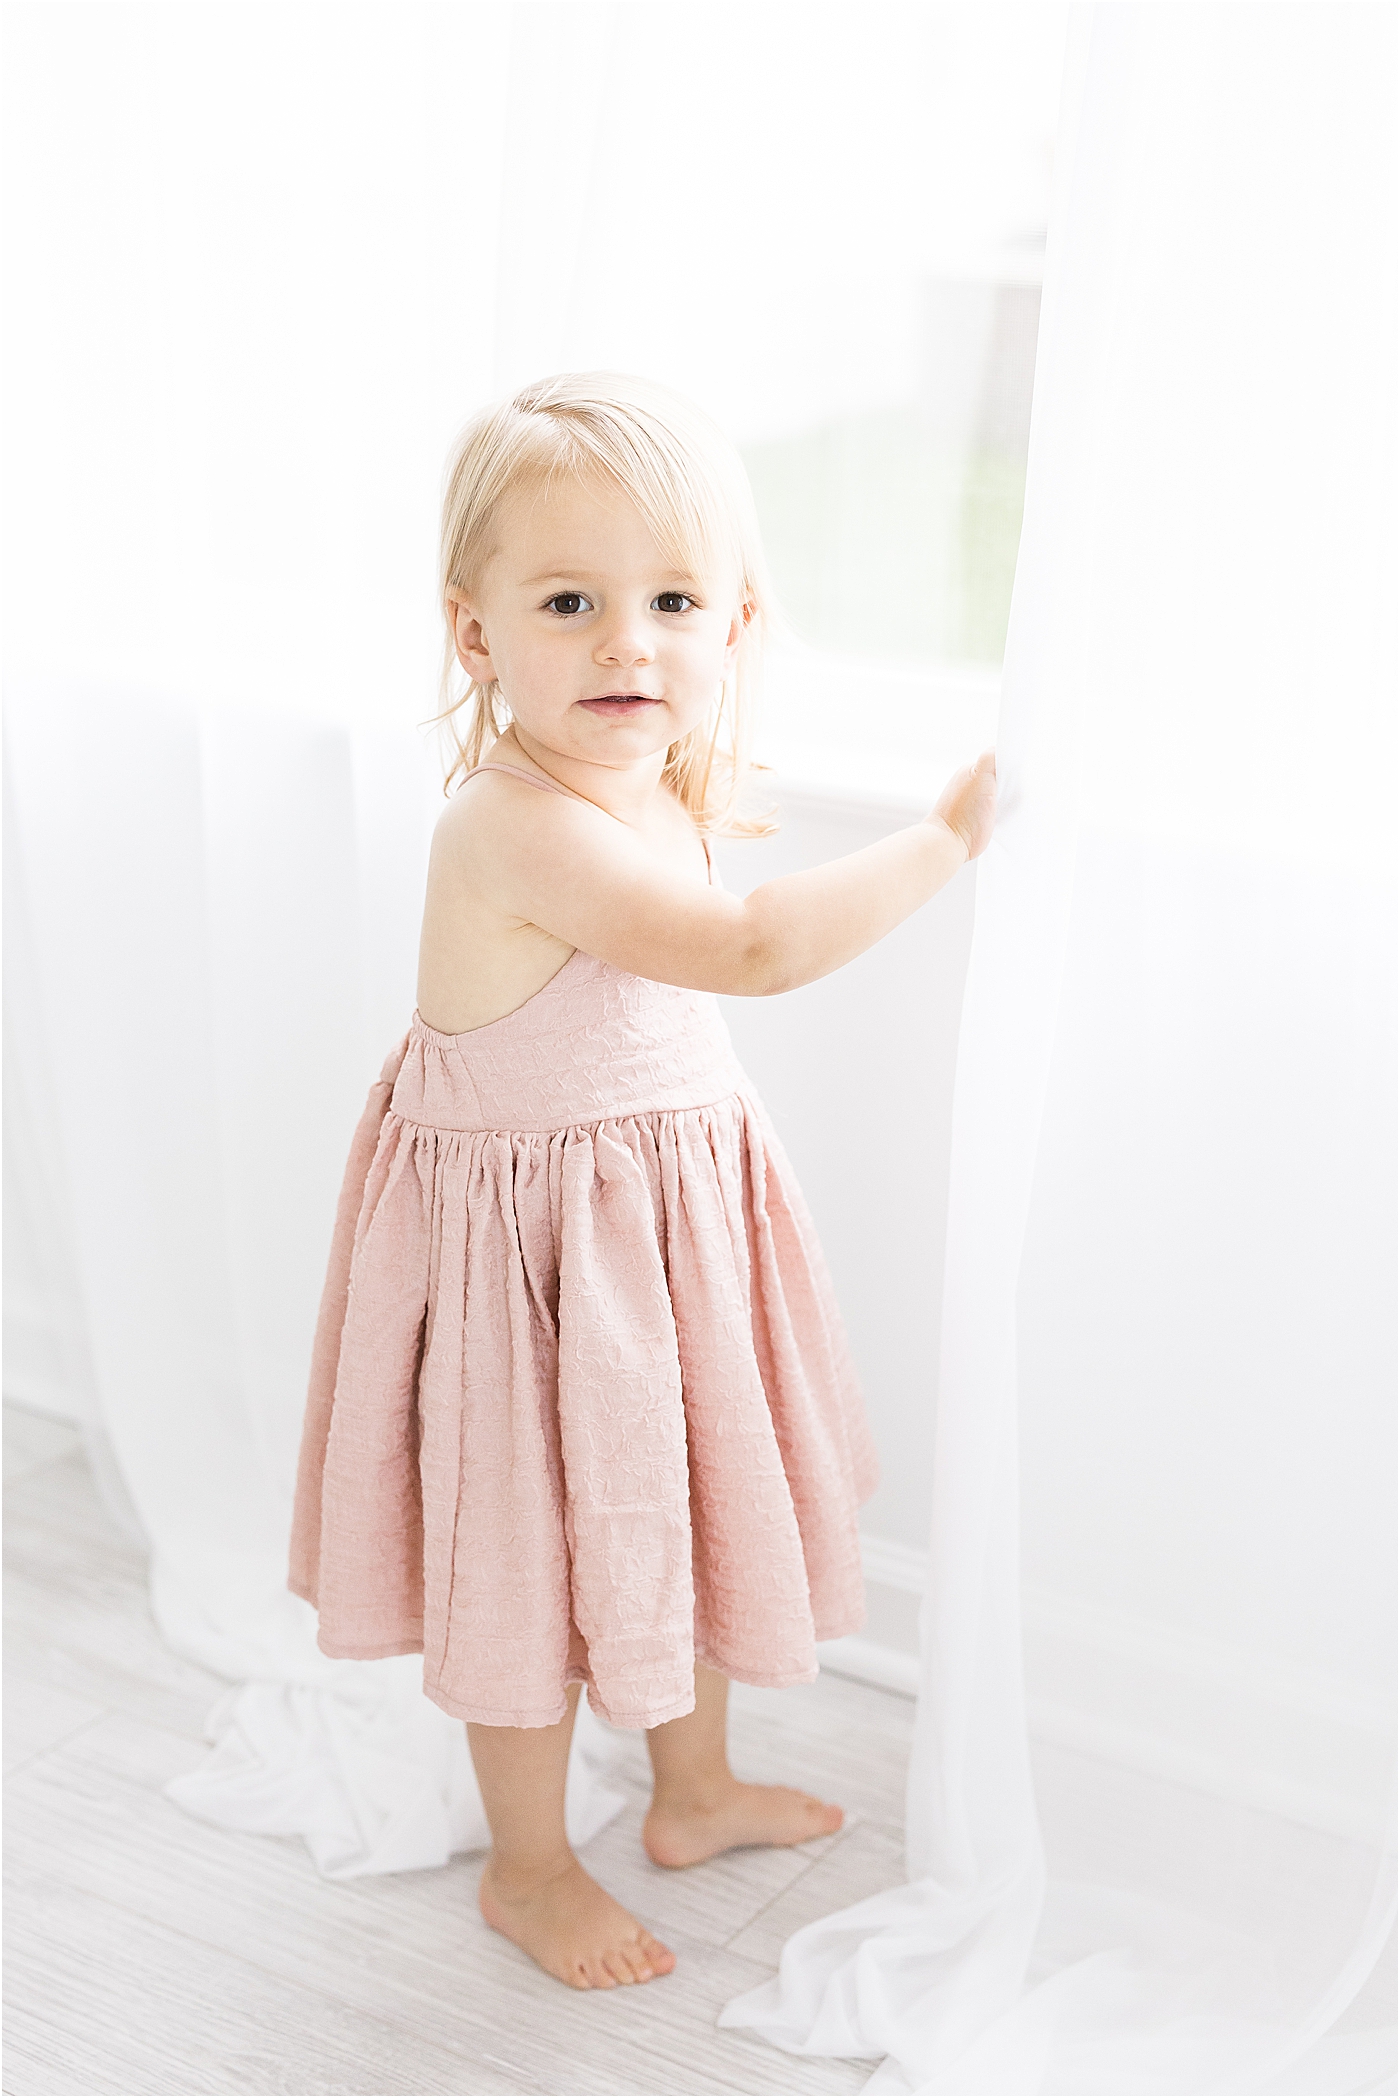 Toddler photo in studio in Fishers, Indiana | Lindsay Konopa Photography